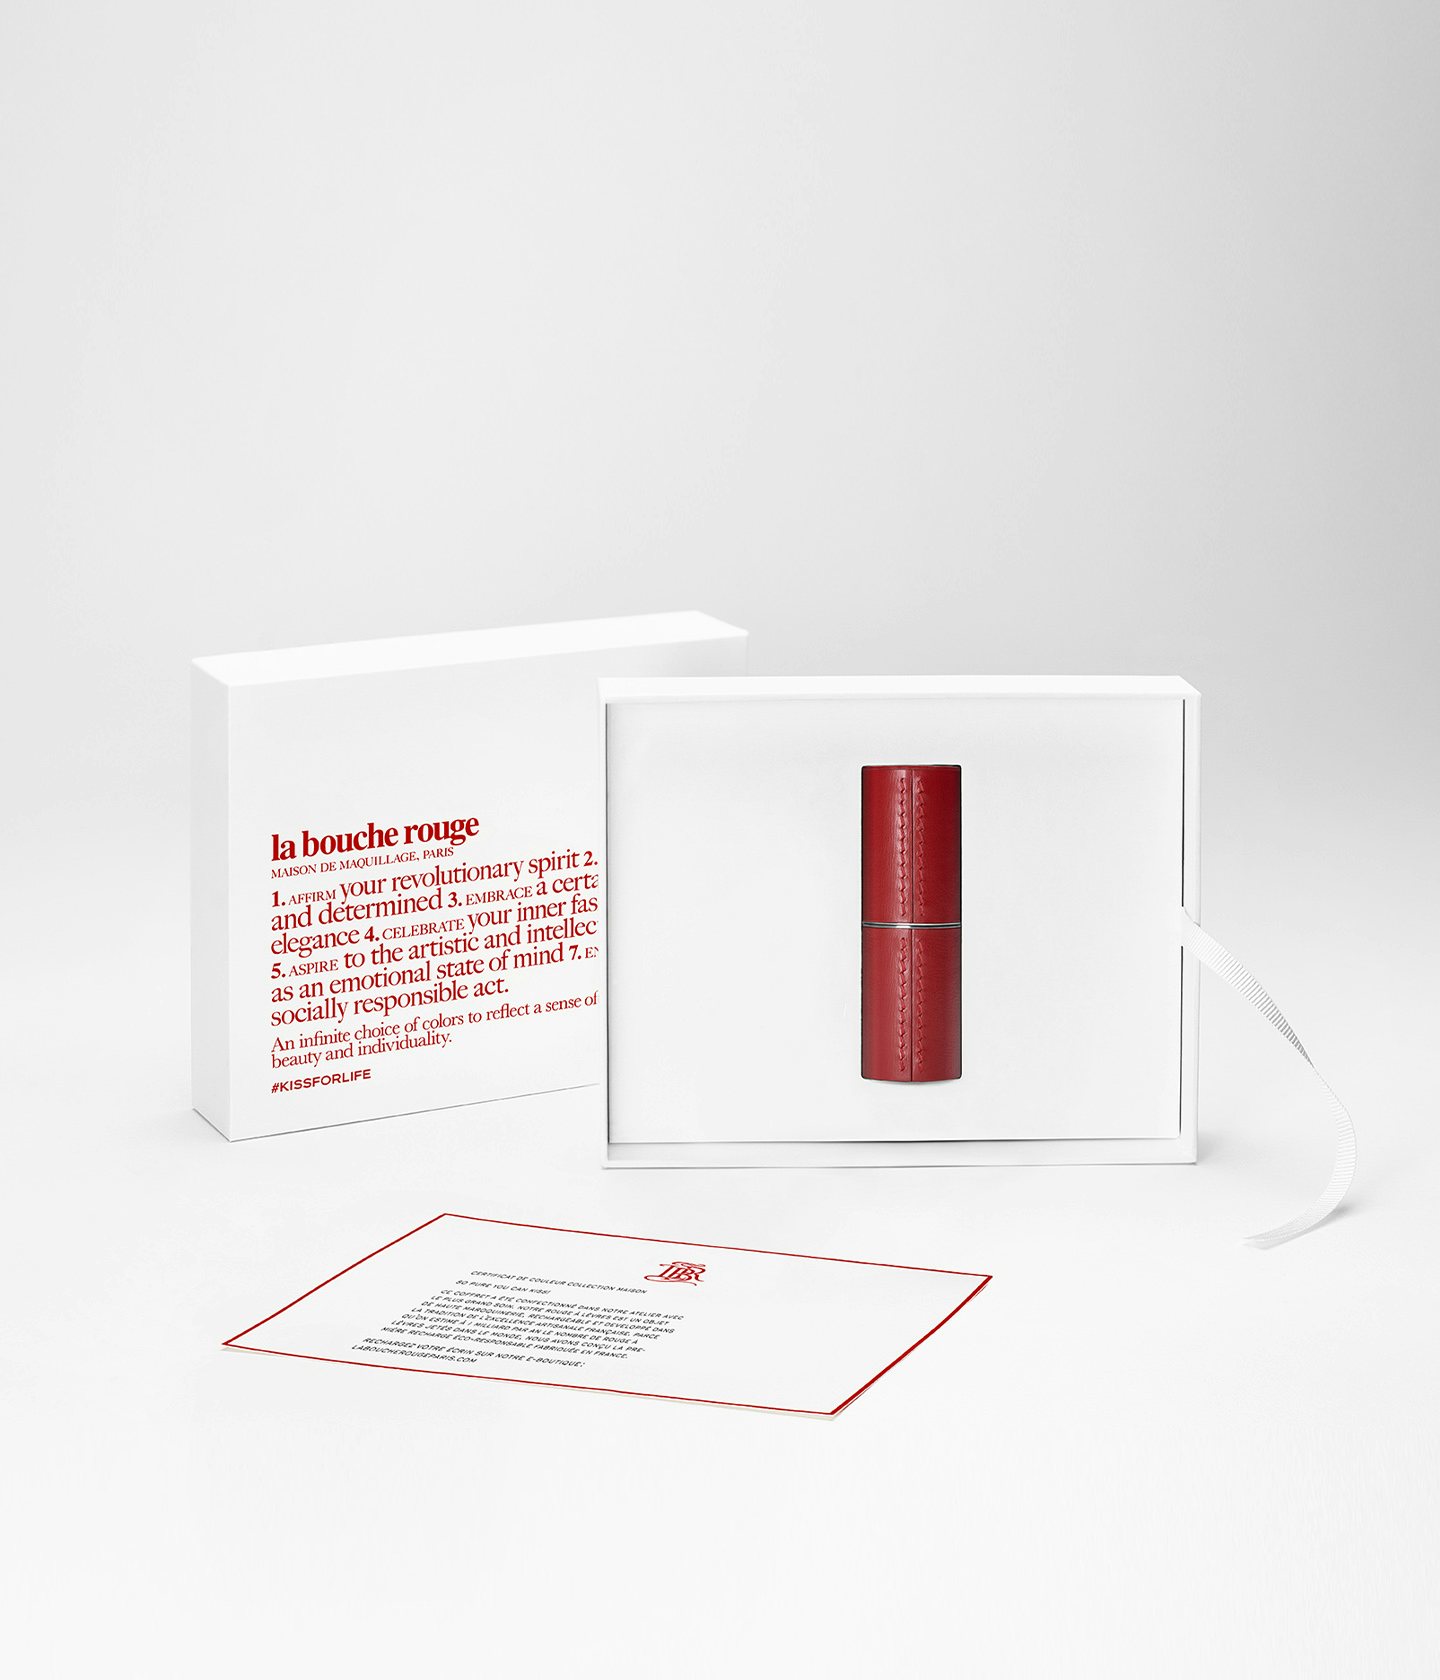 La bouche rouge Red fine leather case in the Manifesto packaging